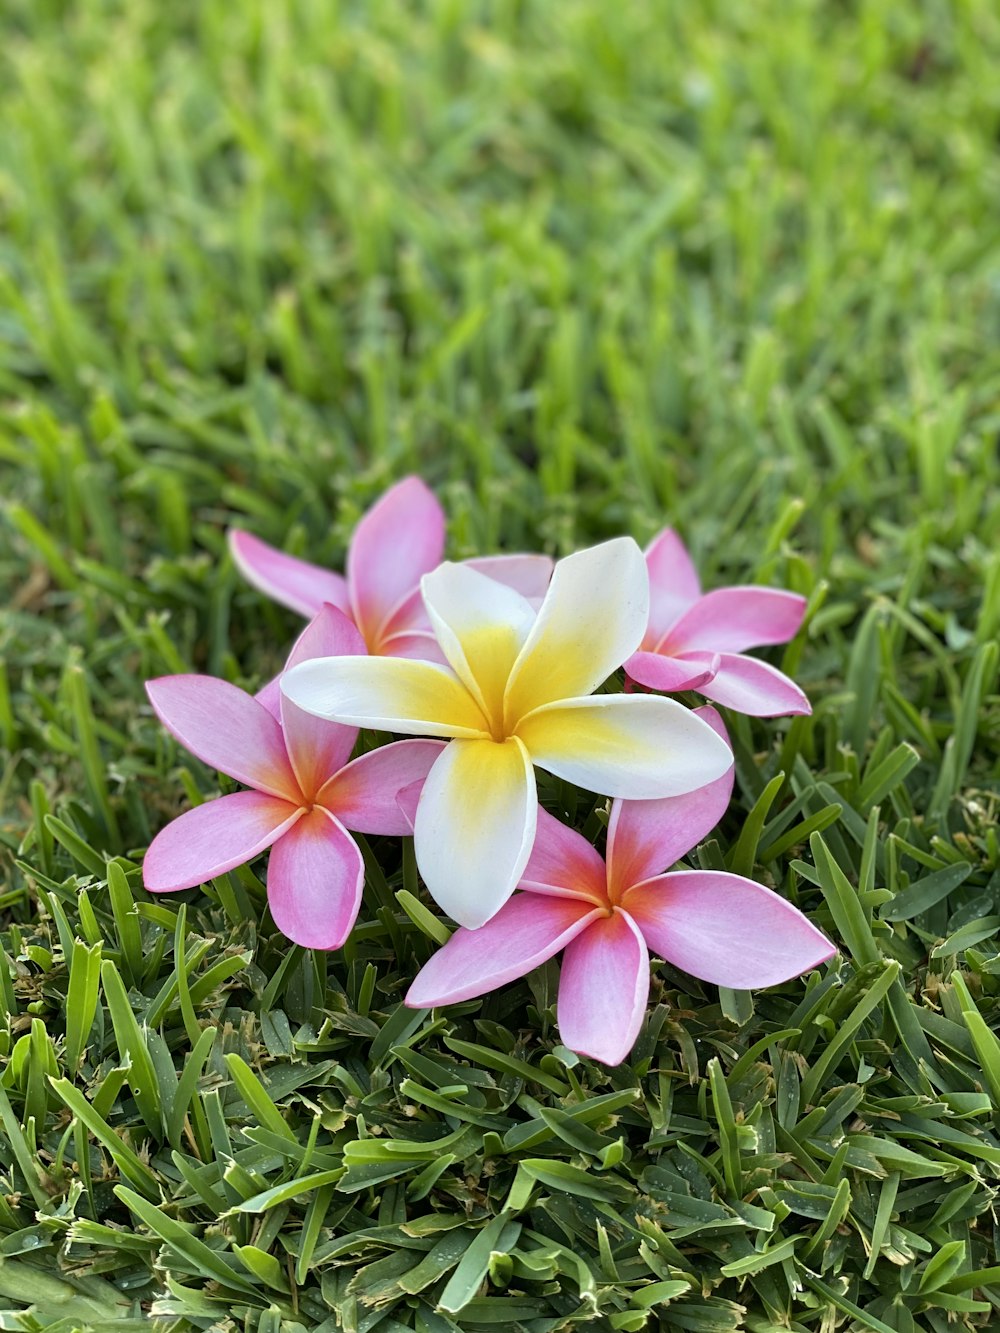 pink and white flower on green grass